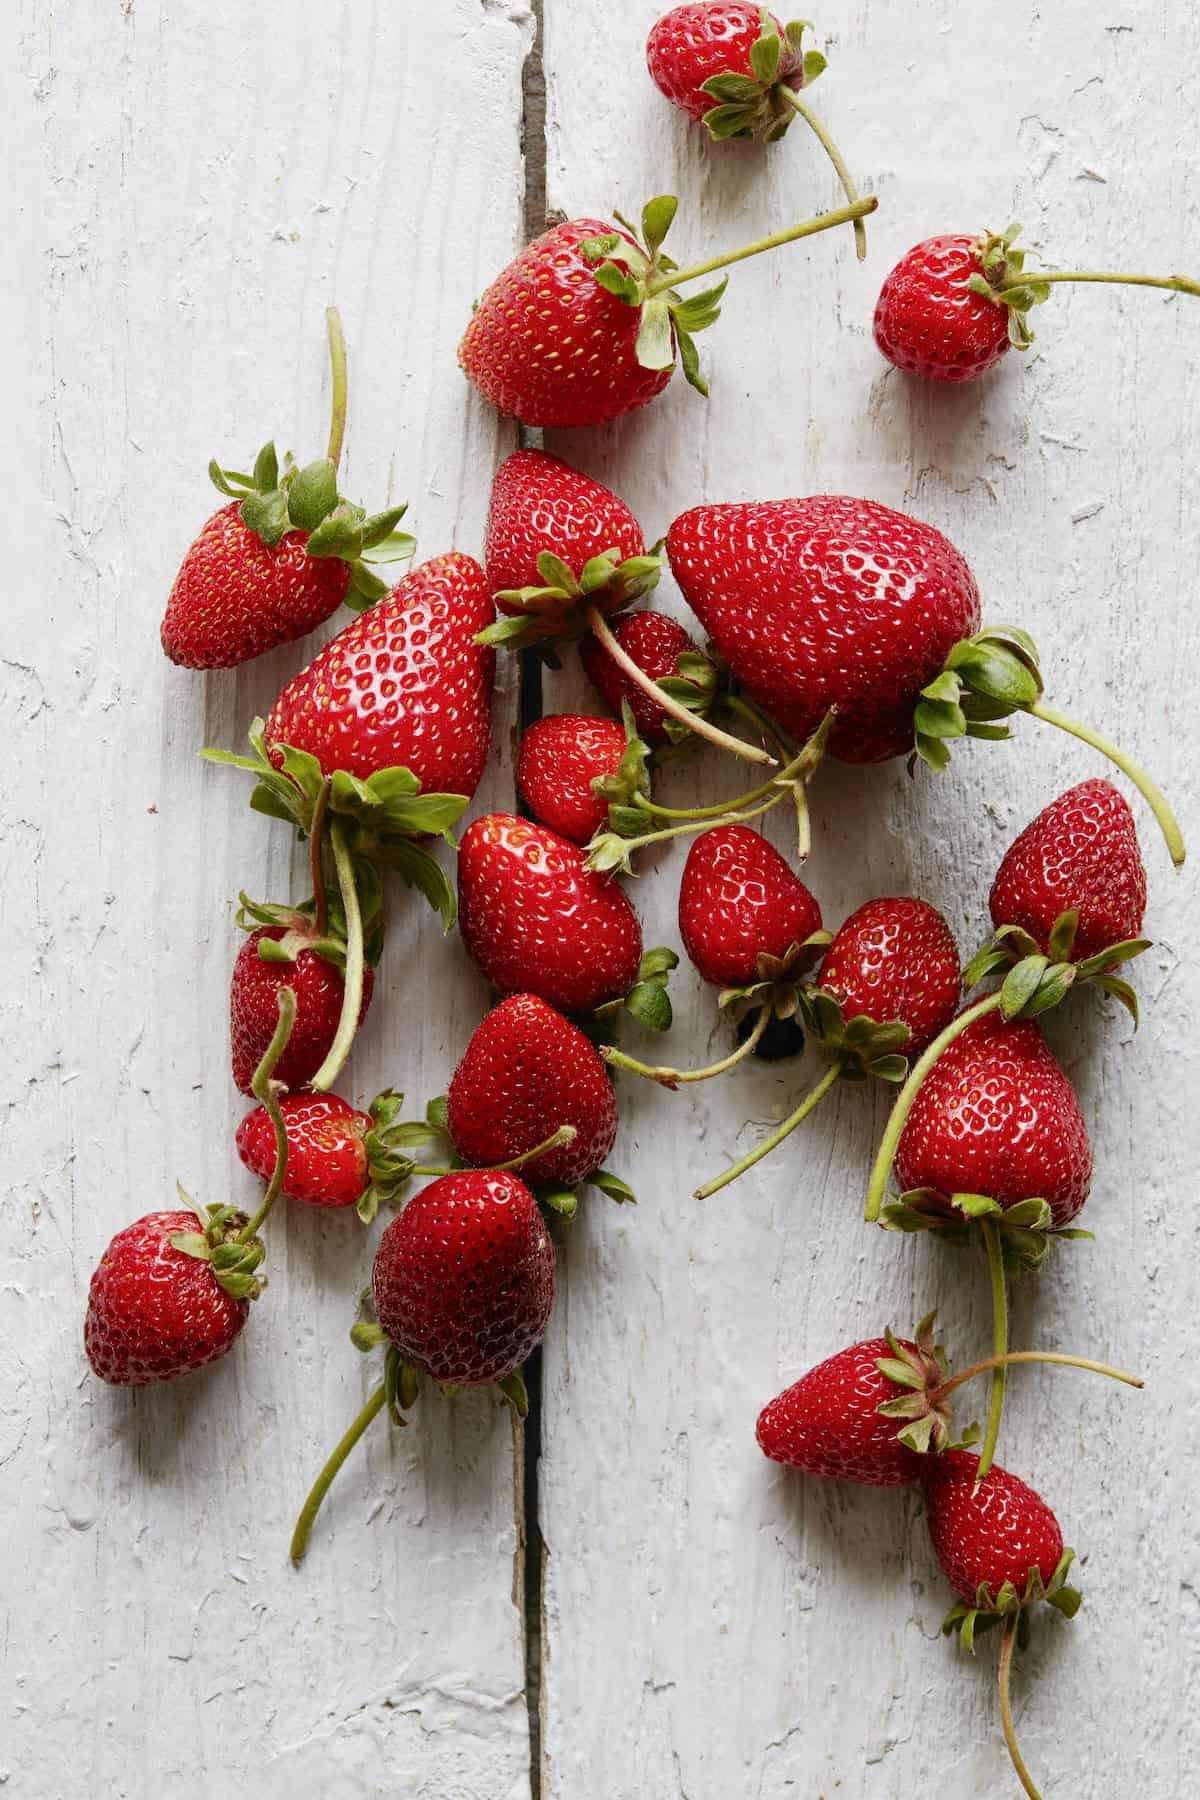 An overhead shot of strawberries on a wooden table top.